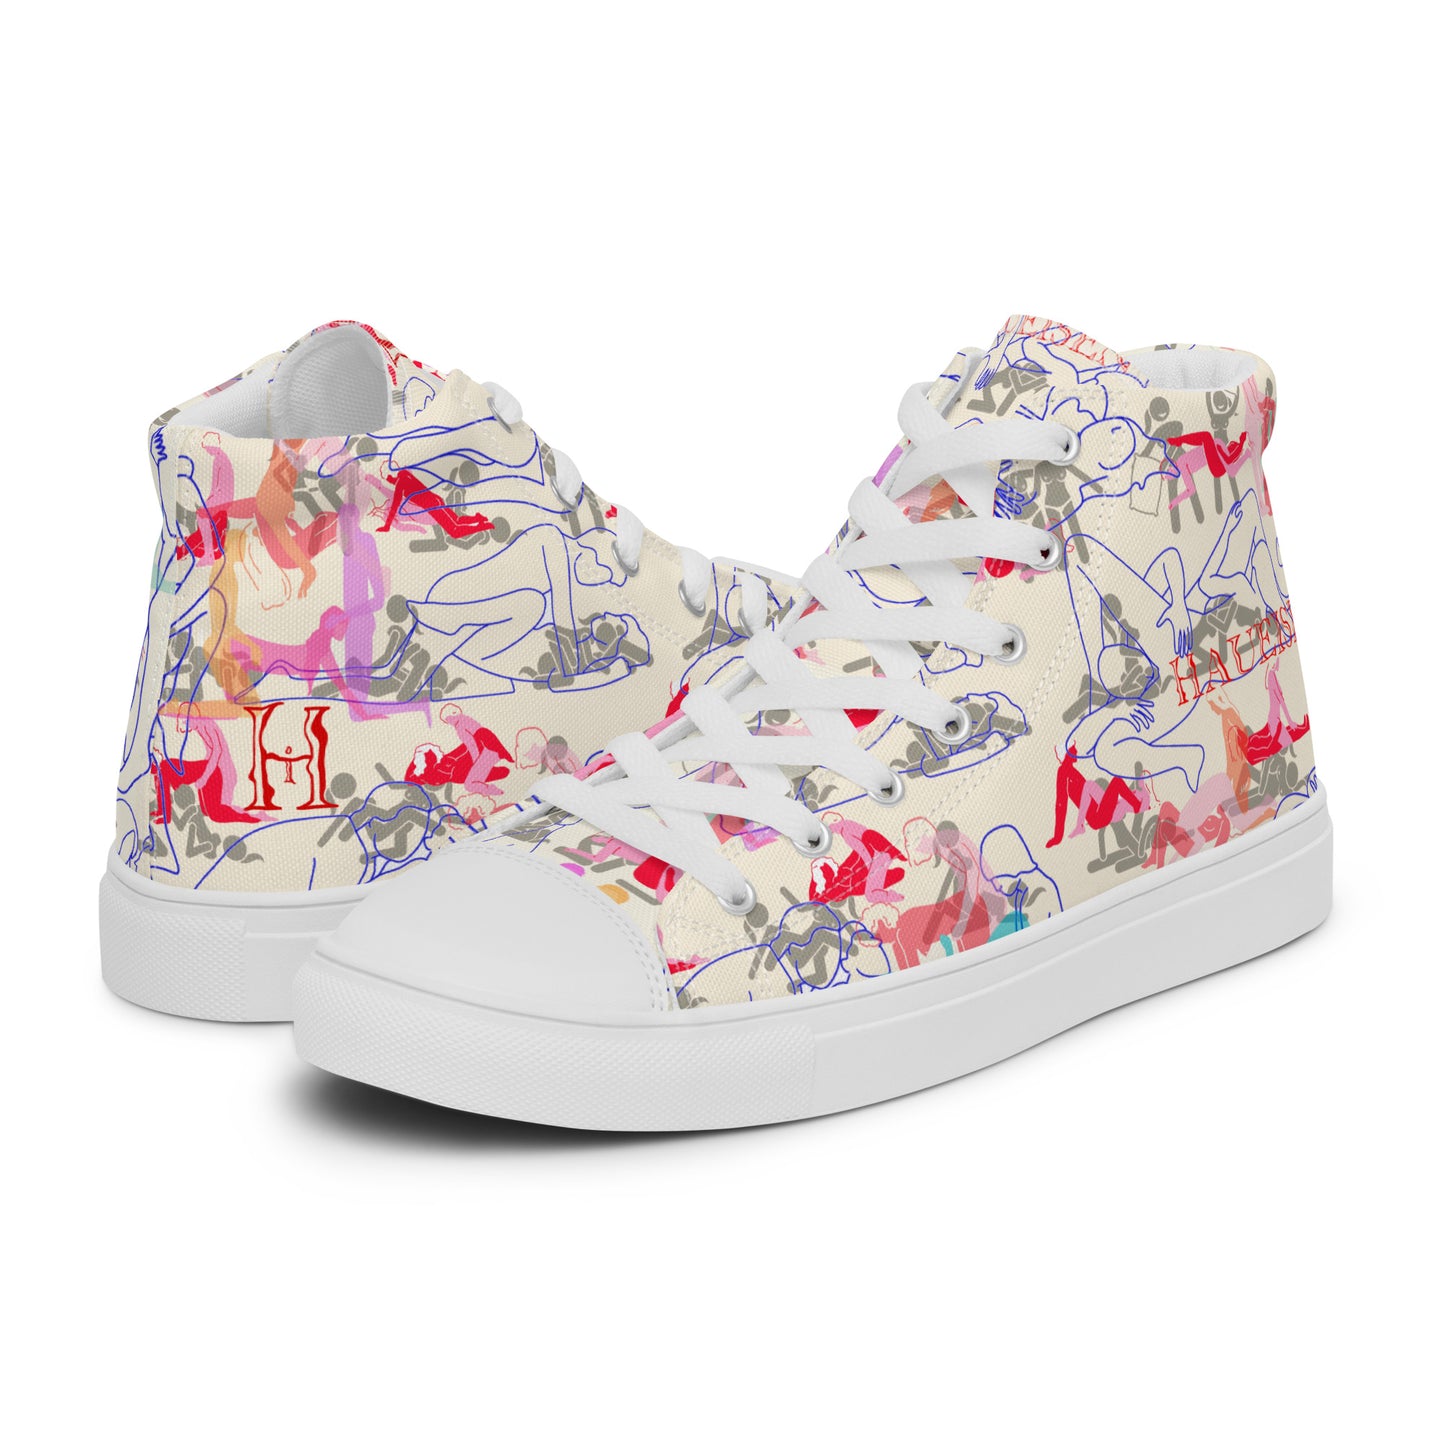 BISEXUAL ORGY Men’s high top canvas shoes